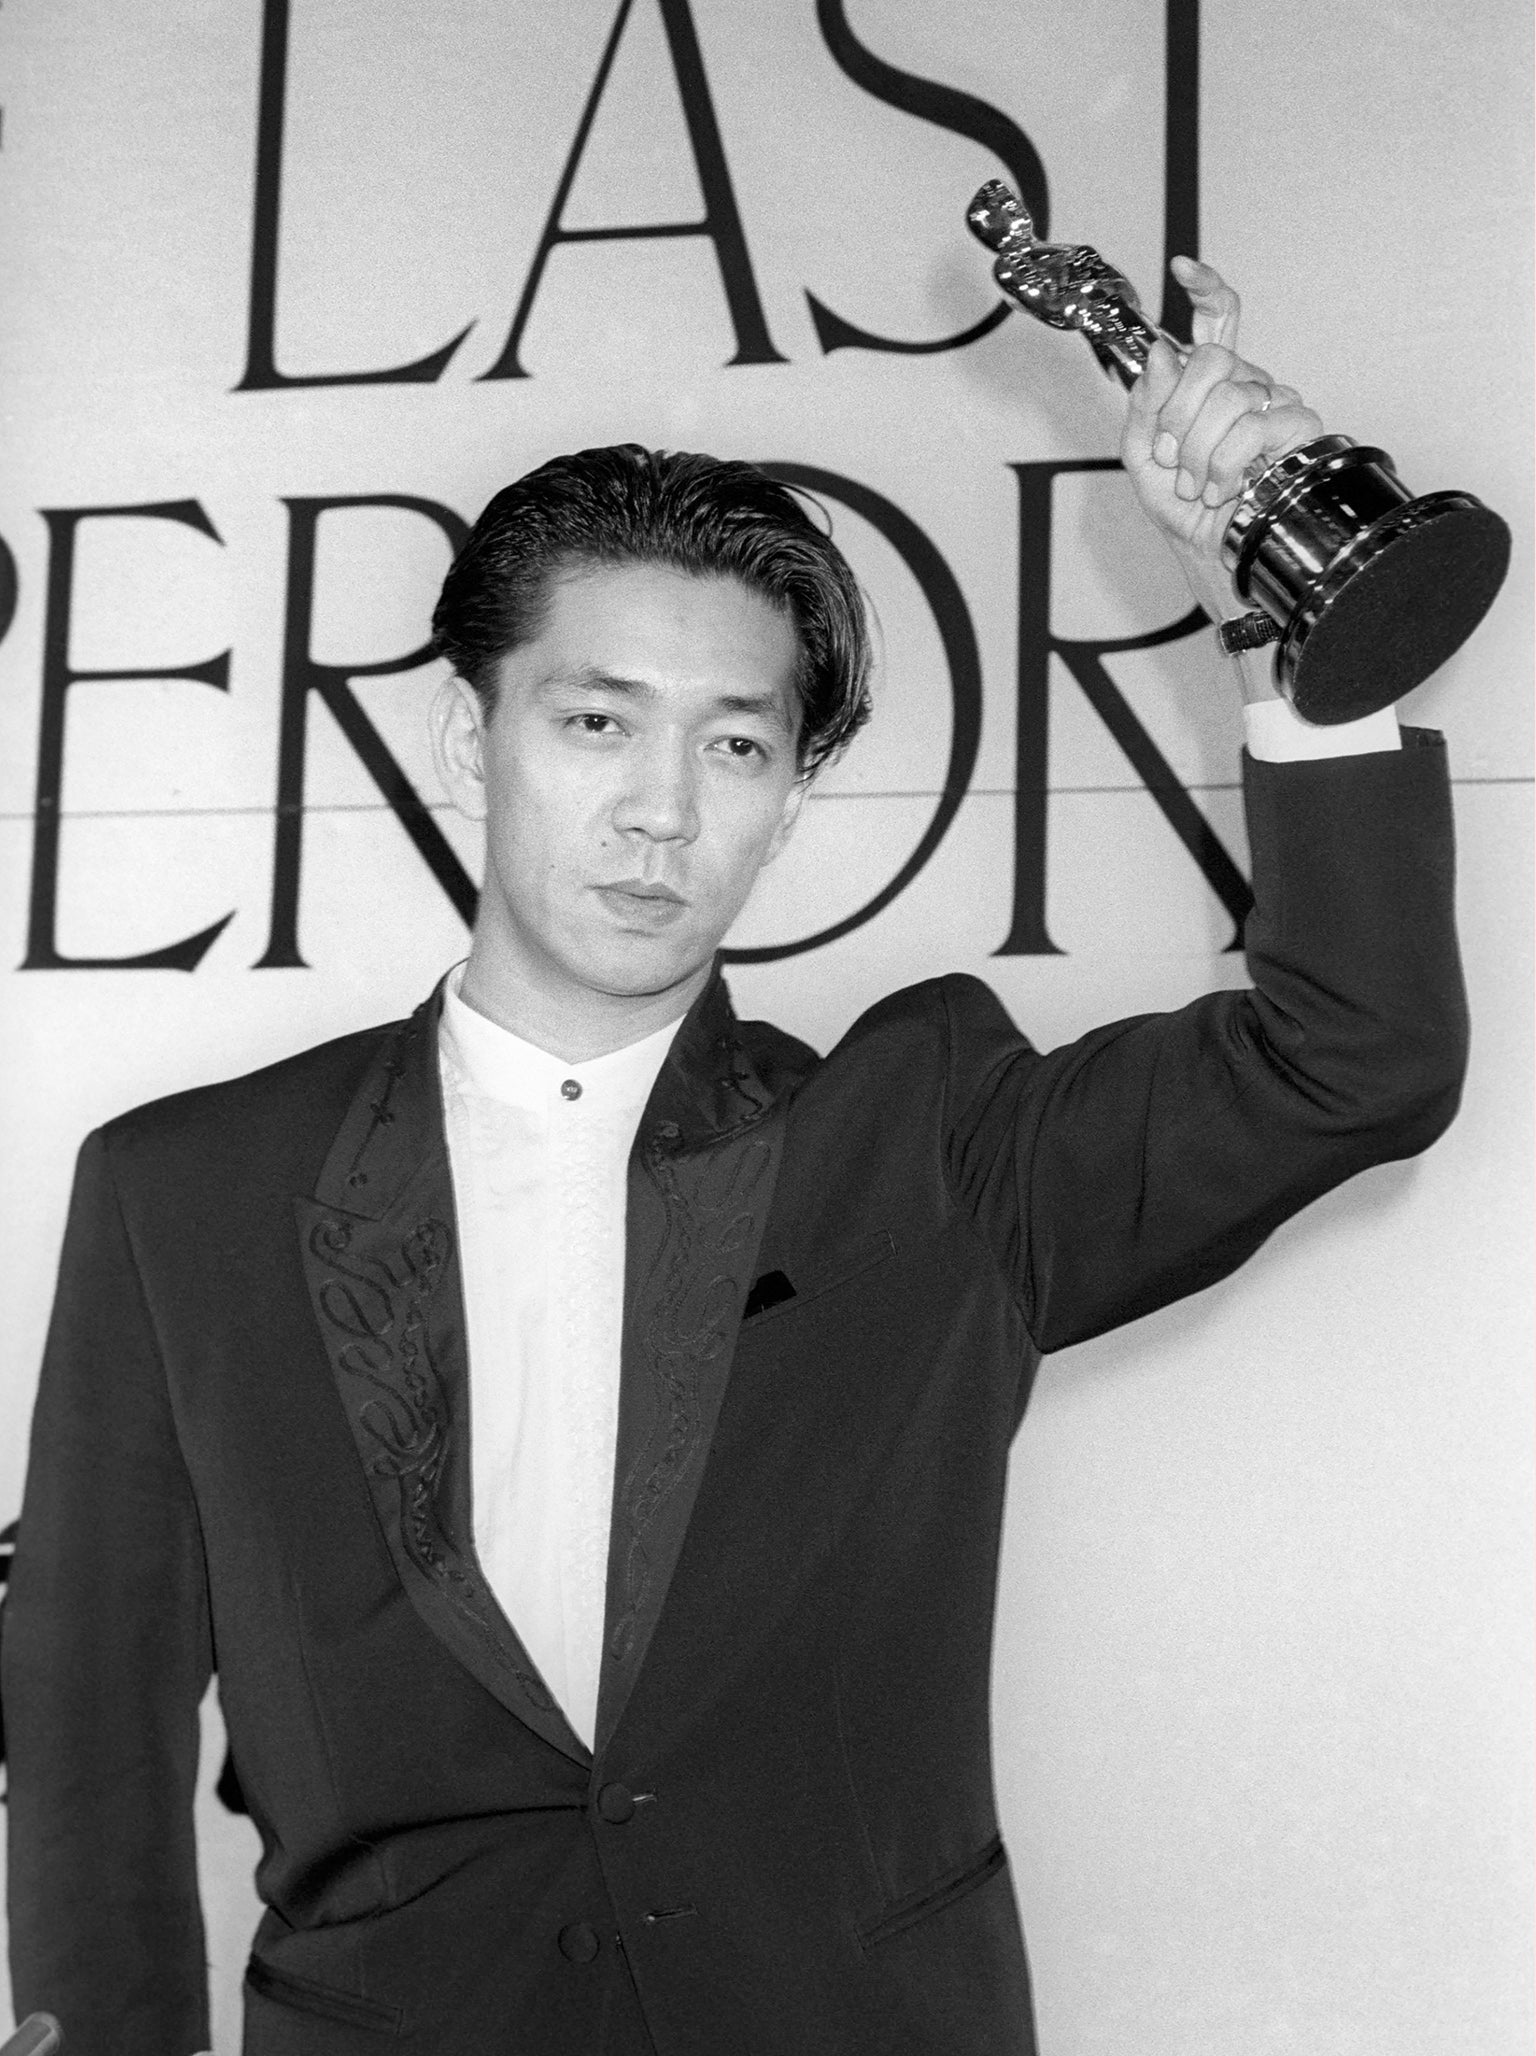 Sakamoto after winning an Academy award for ‘The Last Emperor’ in Tokyo, April 1988